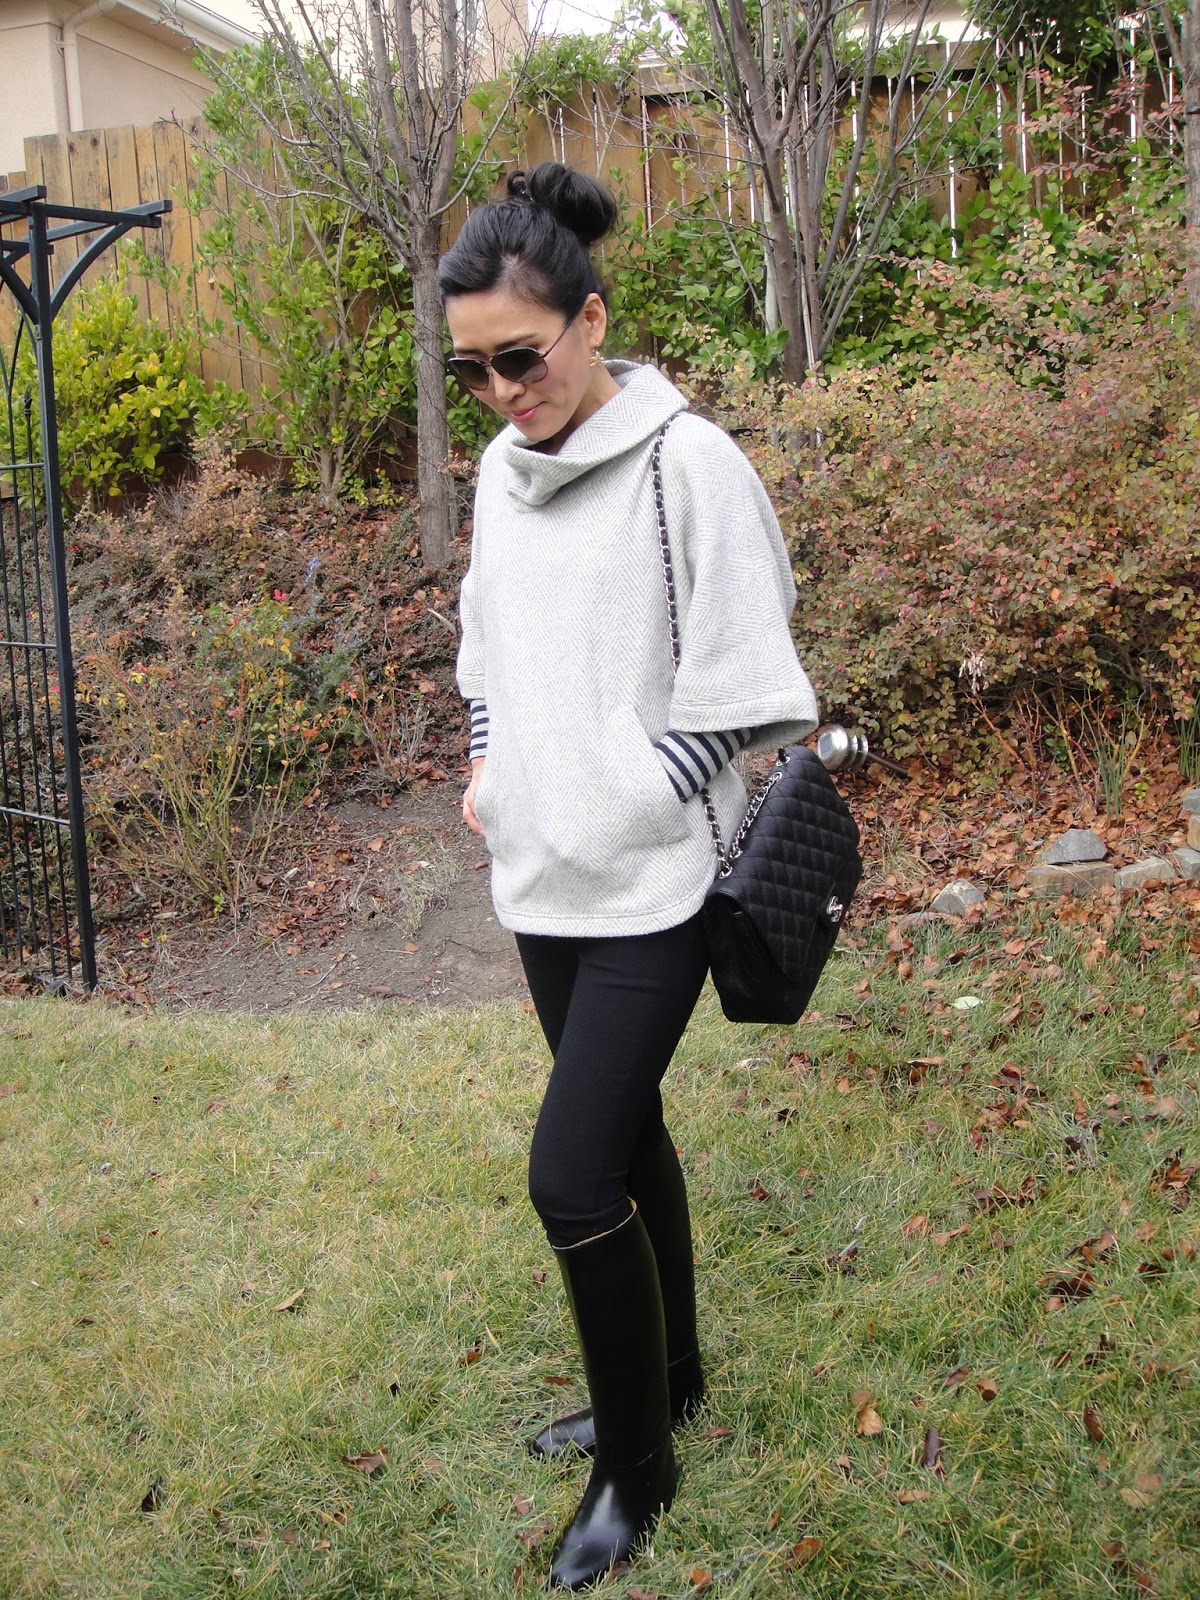 Joanne's chic N thrifty: poncho and riding boot